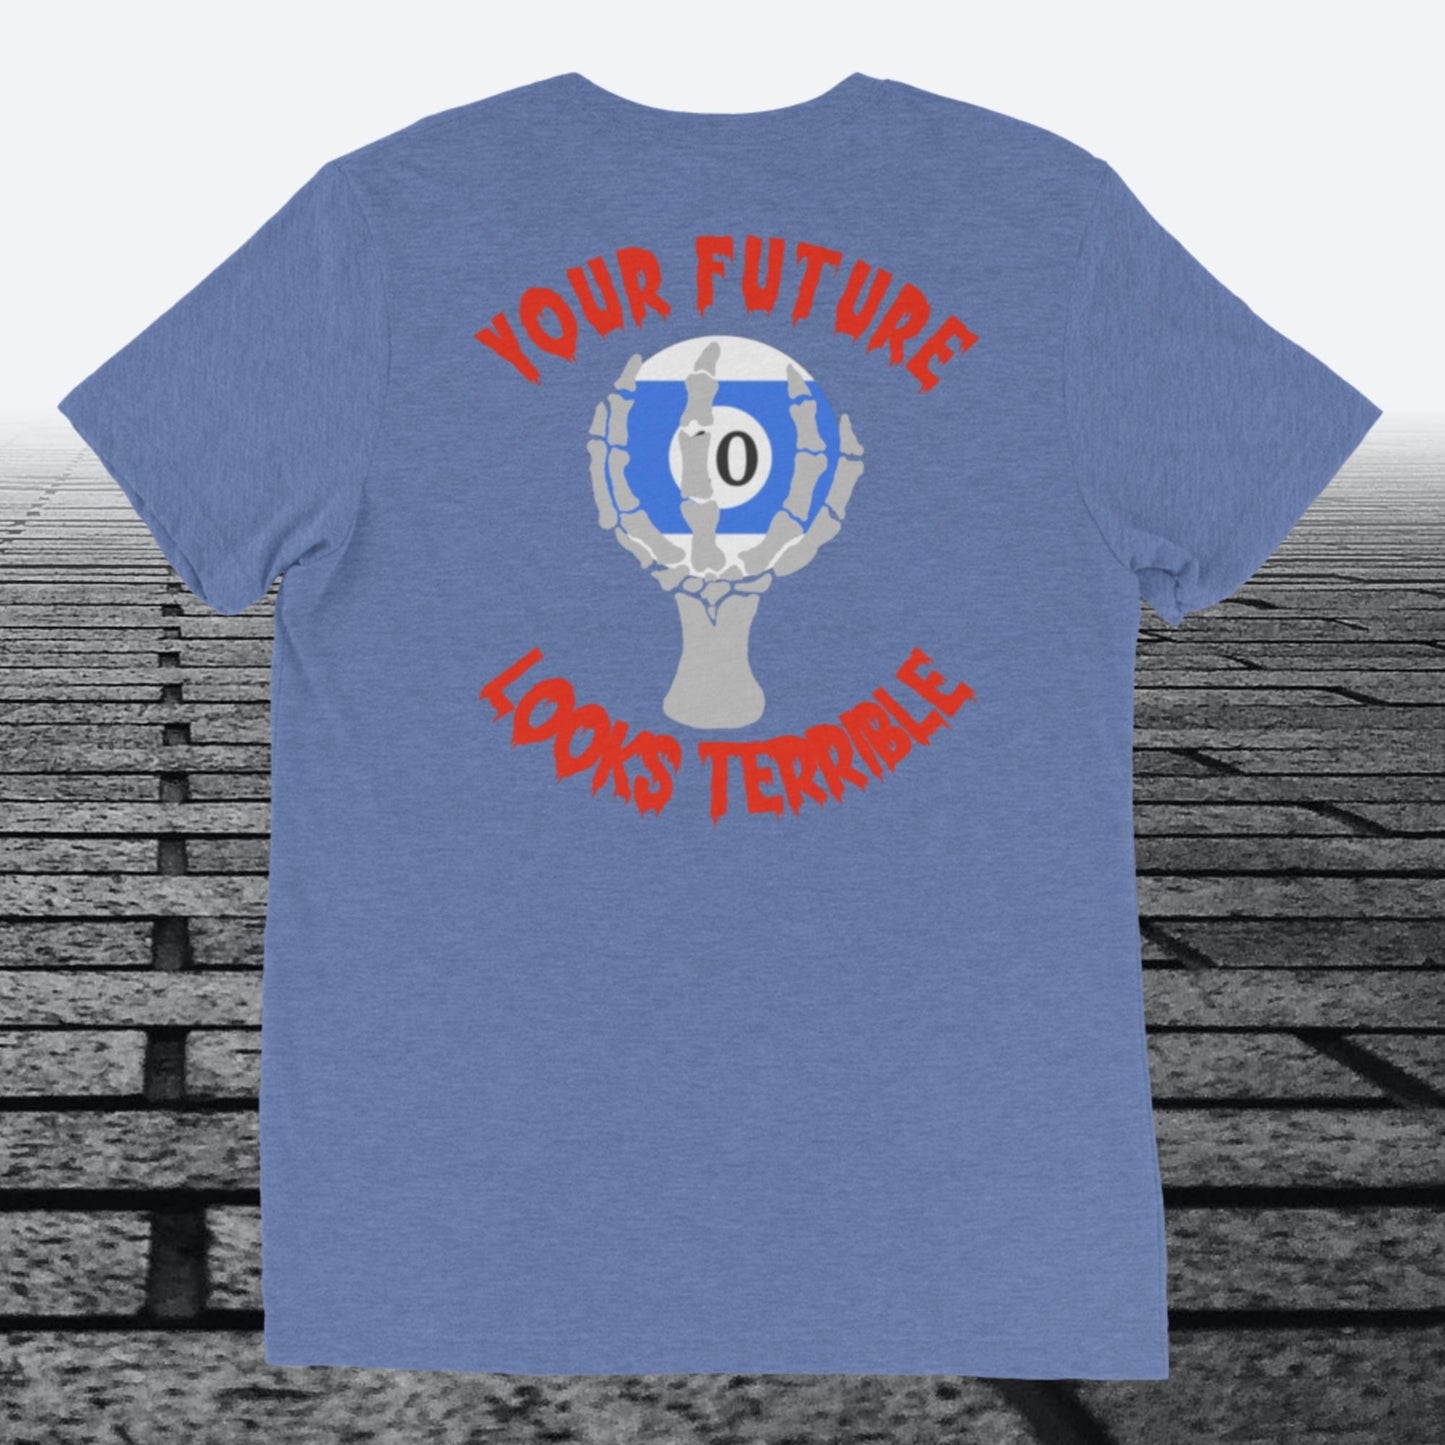 Your Future Looks Terrible with 10 ball, with Logo on the front,  Tri-blend t-shirt